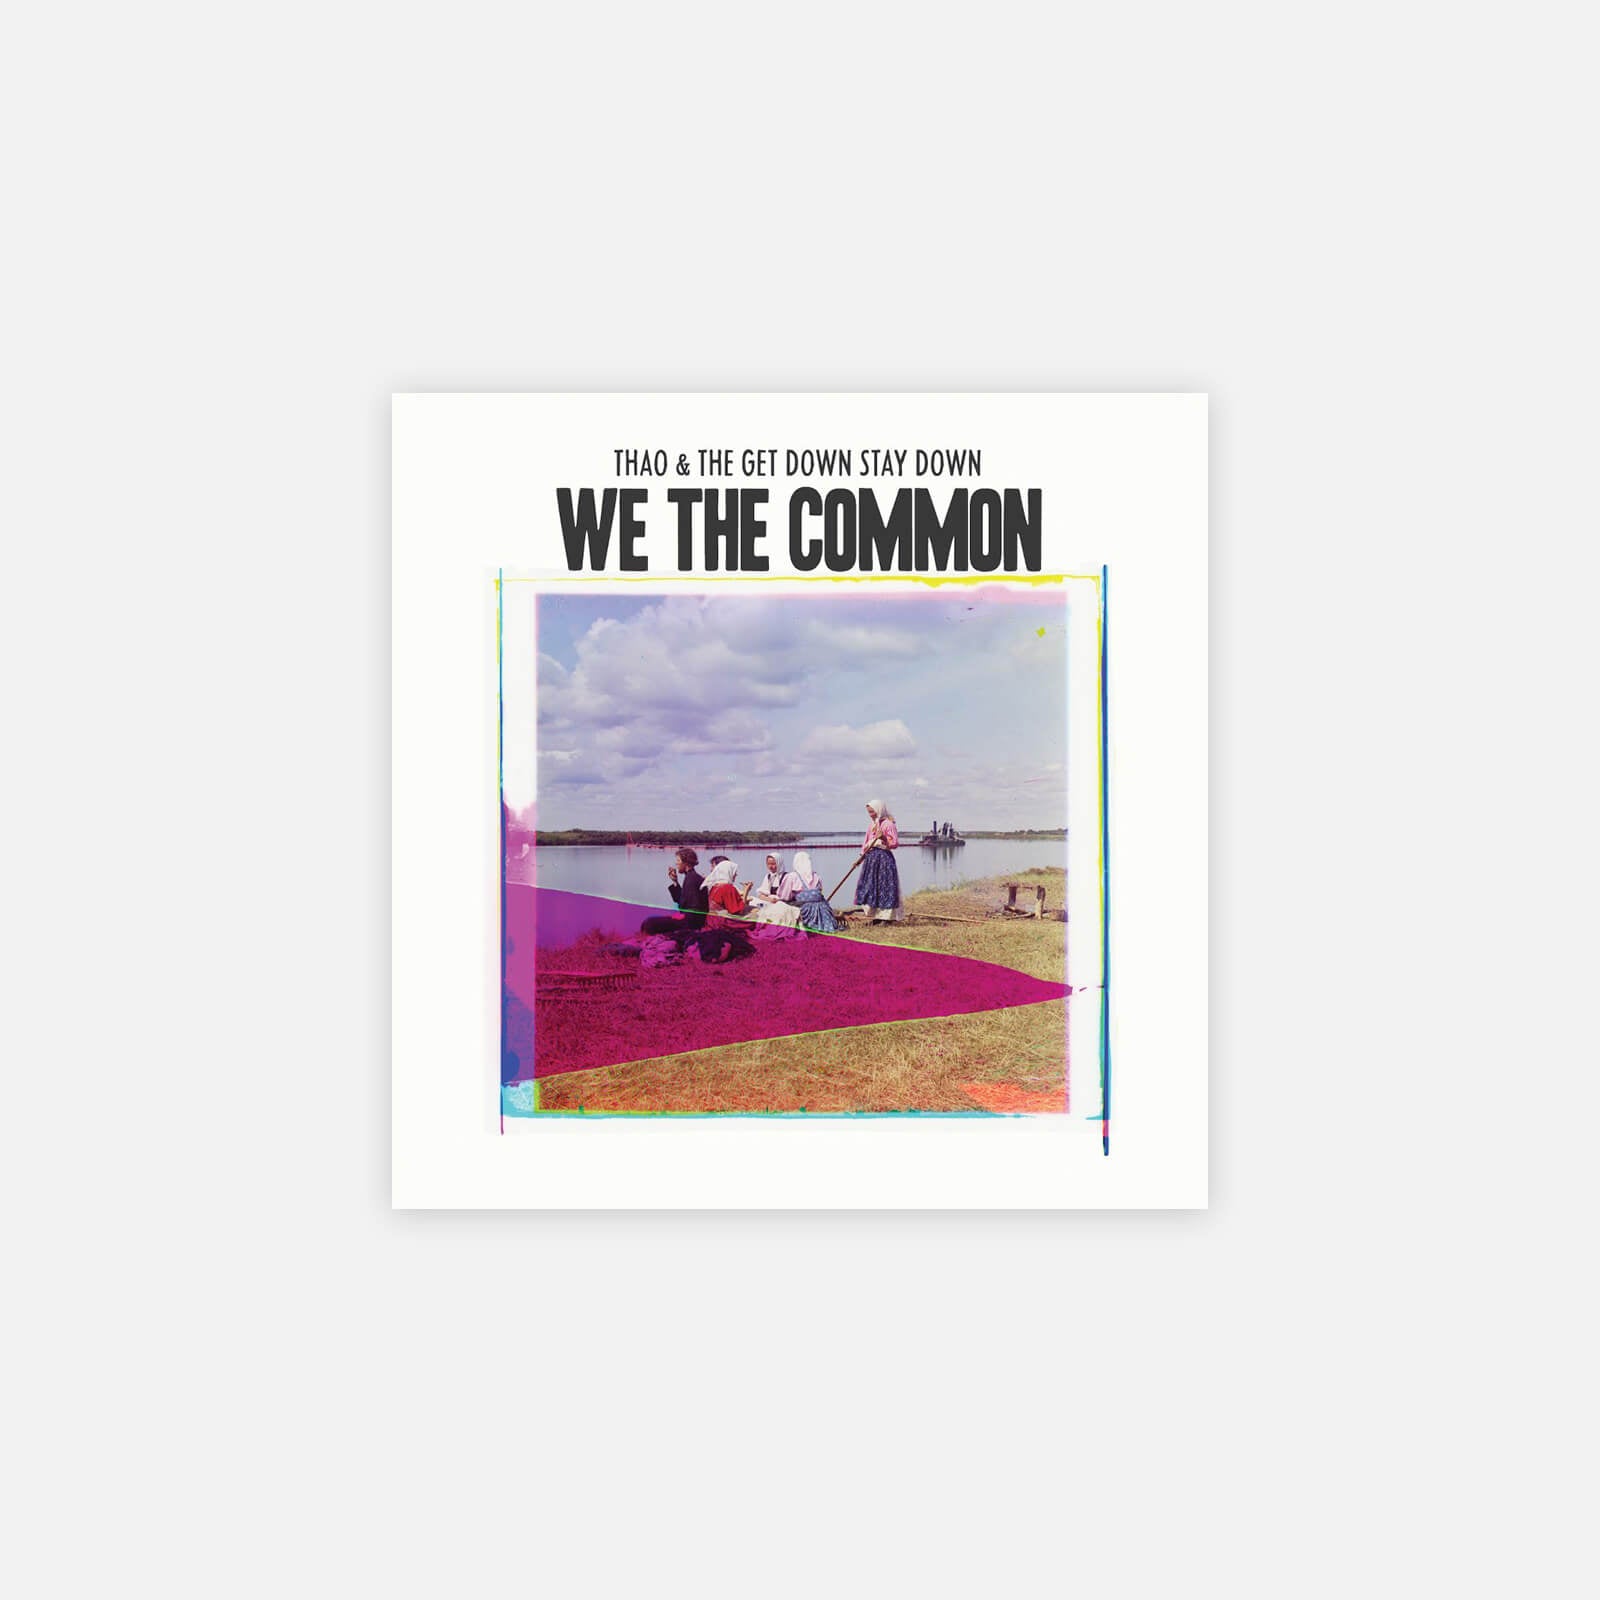 Thao & The Get Down Stay Down 'We the Common'